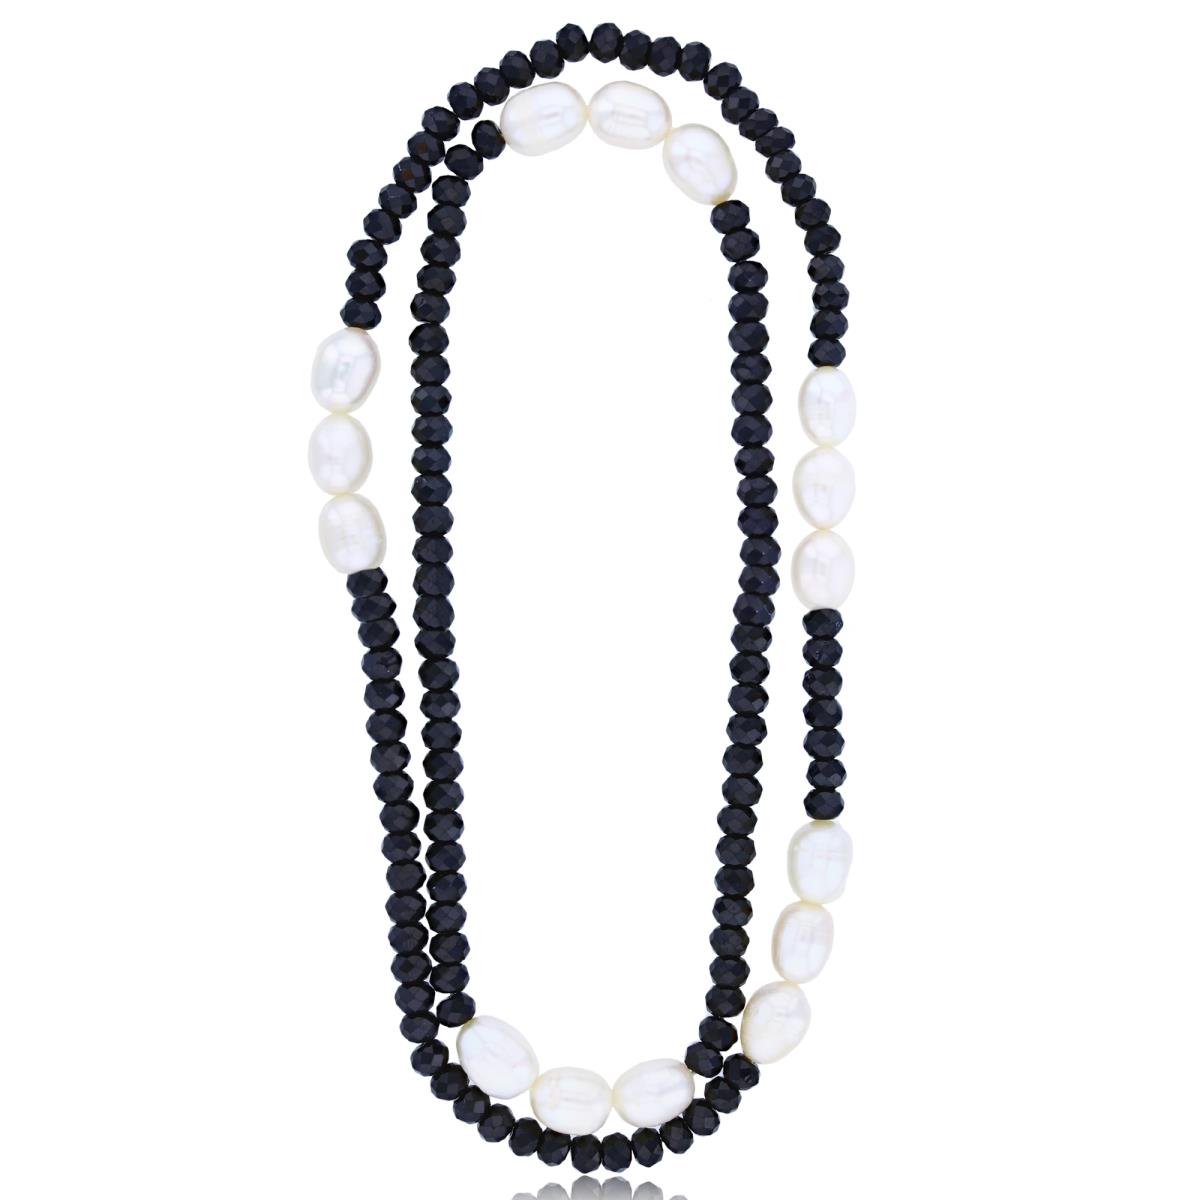 7-8mm Oval FWP & 4x5mm Black Spinel 36" Necklace